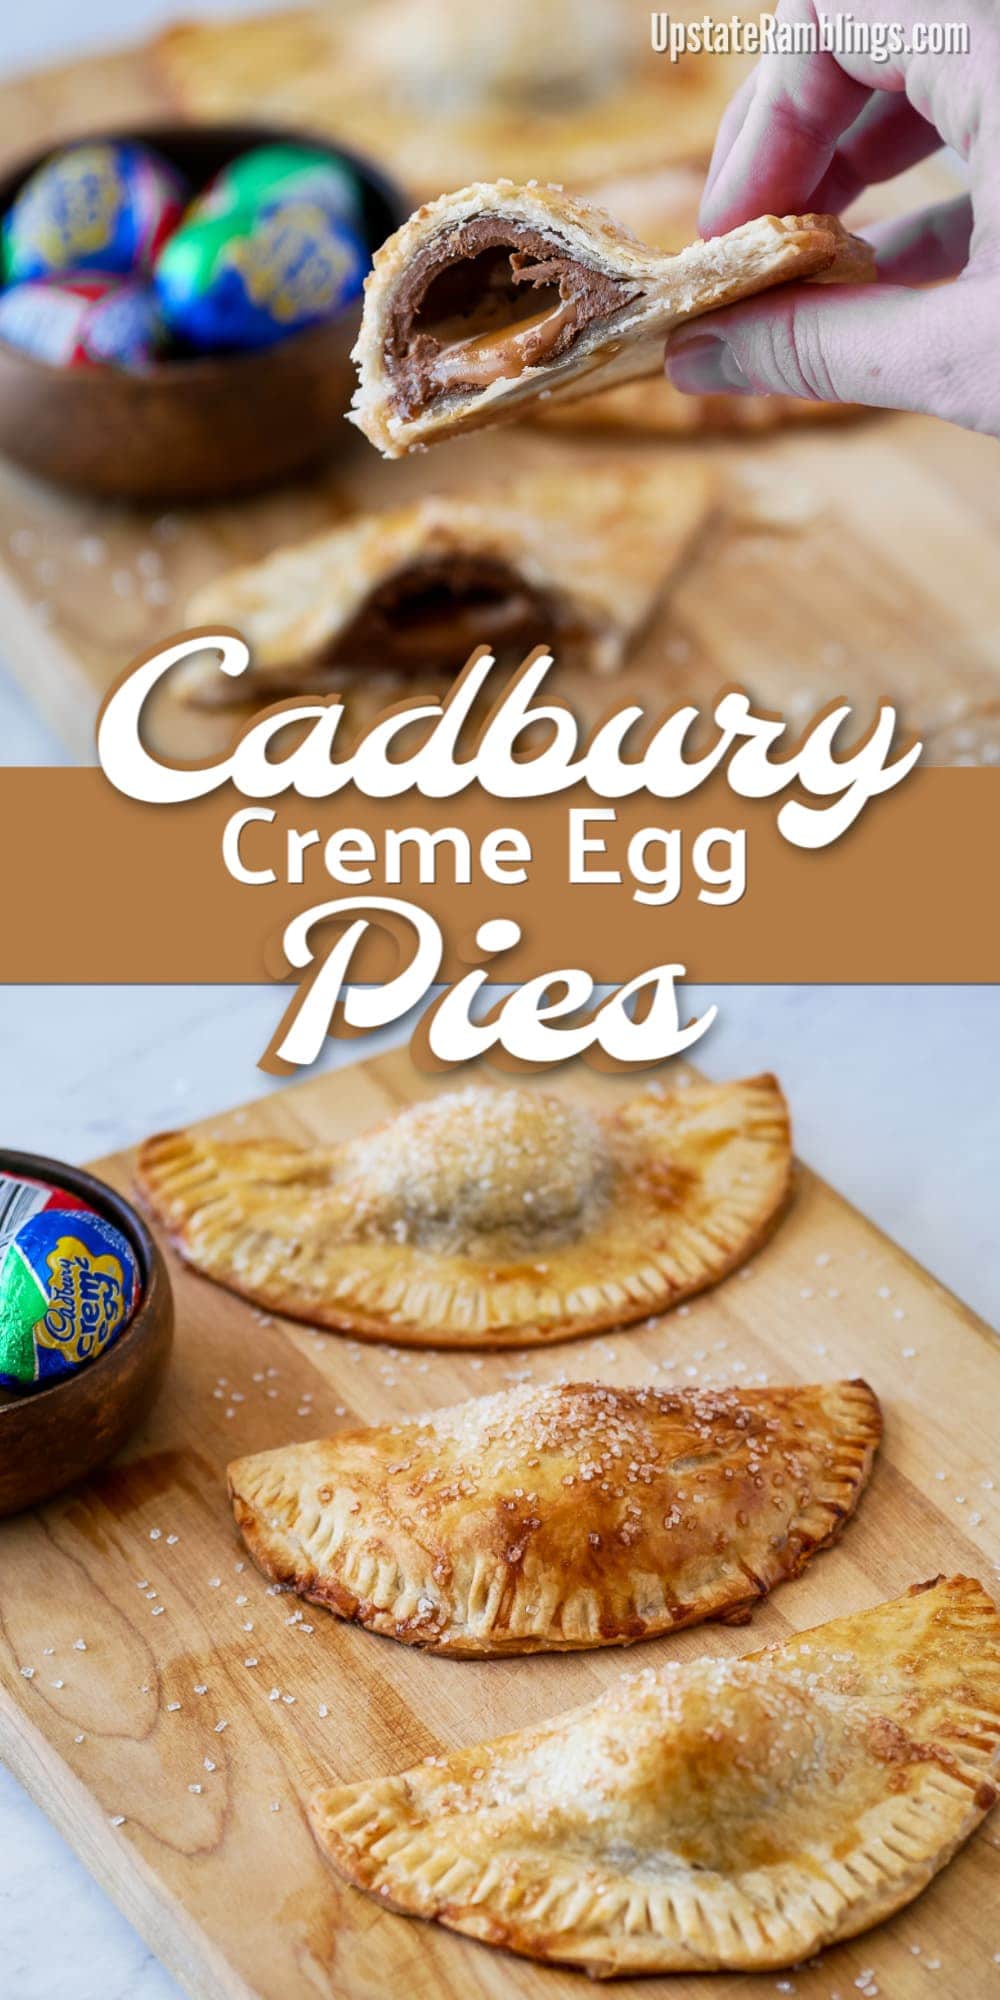 Make a fun Cadbury Creme Egg dessert by baking the chocolate eggs into a hand pie for a quick and easy Easter dessert. An unexpected chocolate Easter treat with a combination of flaky pie crust and gooey filling that you need to try to appreciate! #easterdessert #cadburycremeegg